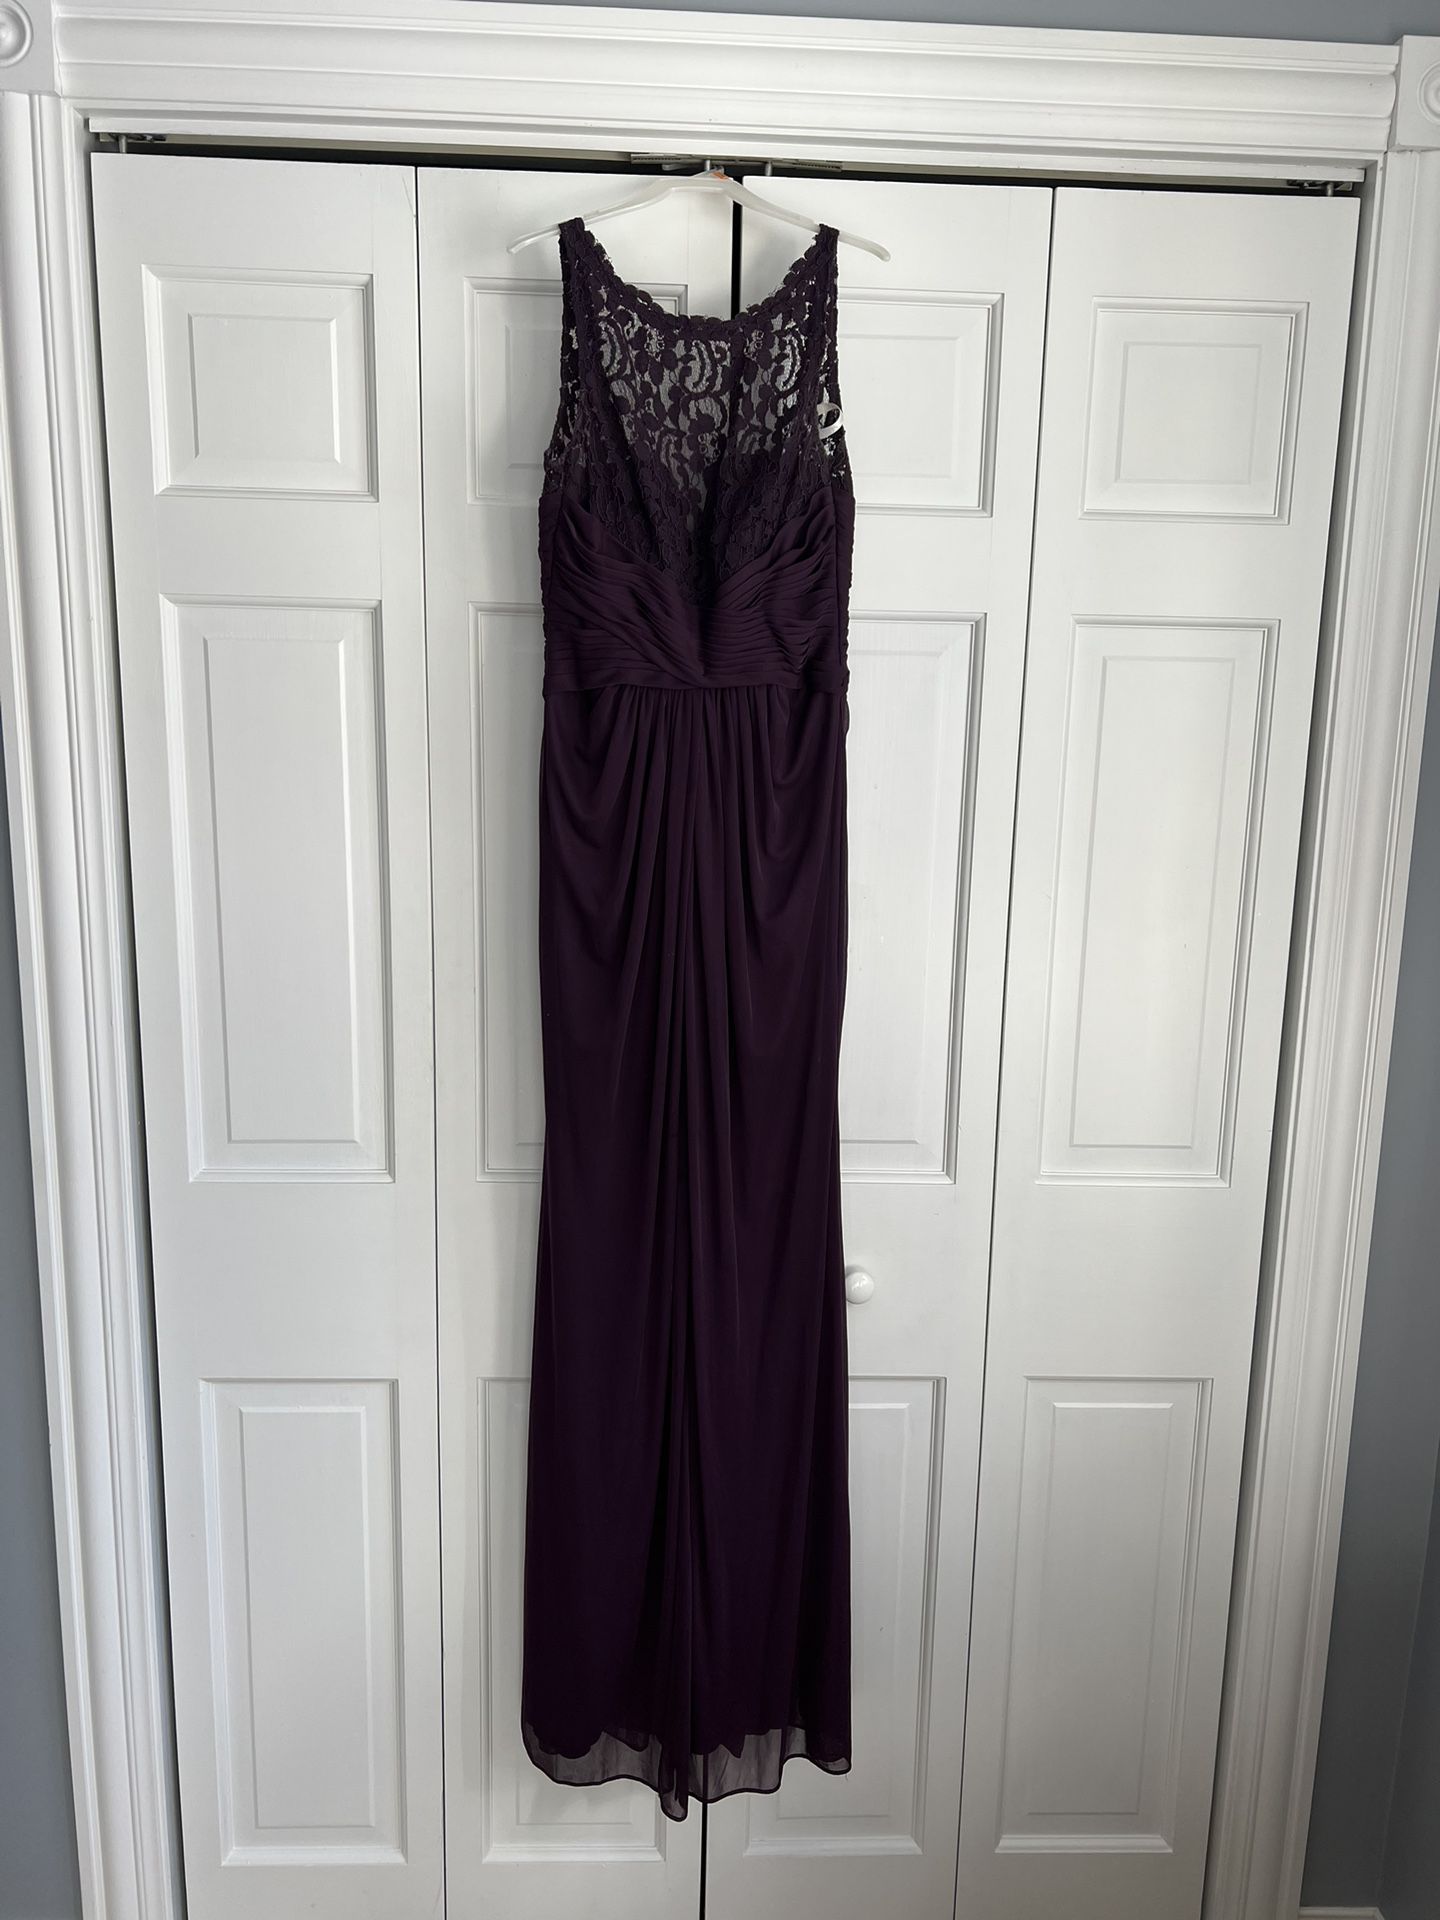 Gown For Wedding Or Formal Event